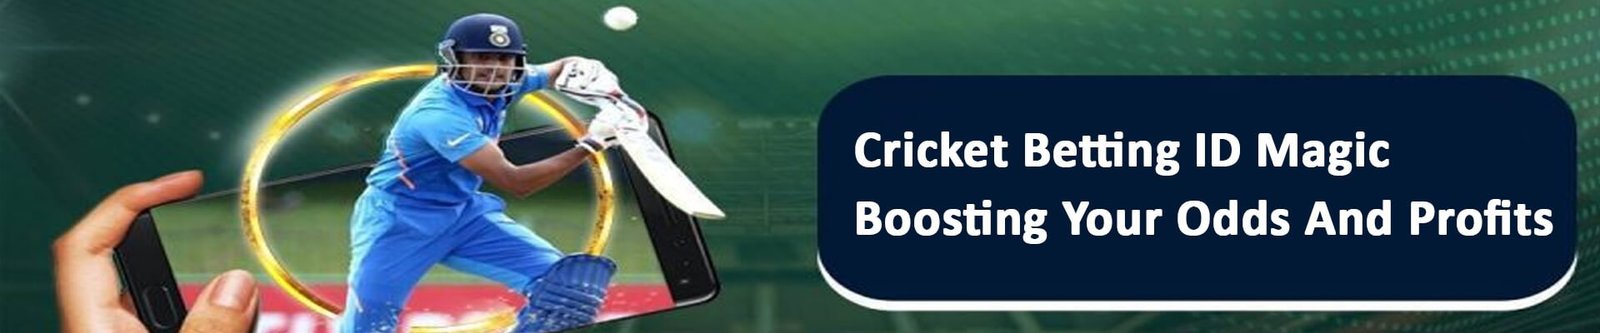 Cricket Betting ID Magic Boosting Your Odds and Profits